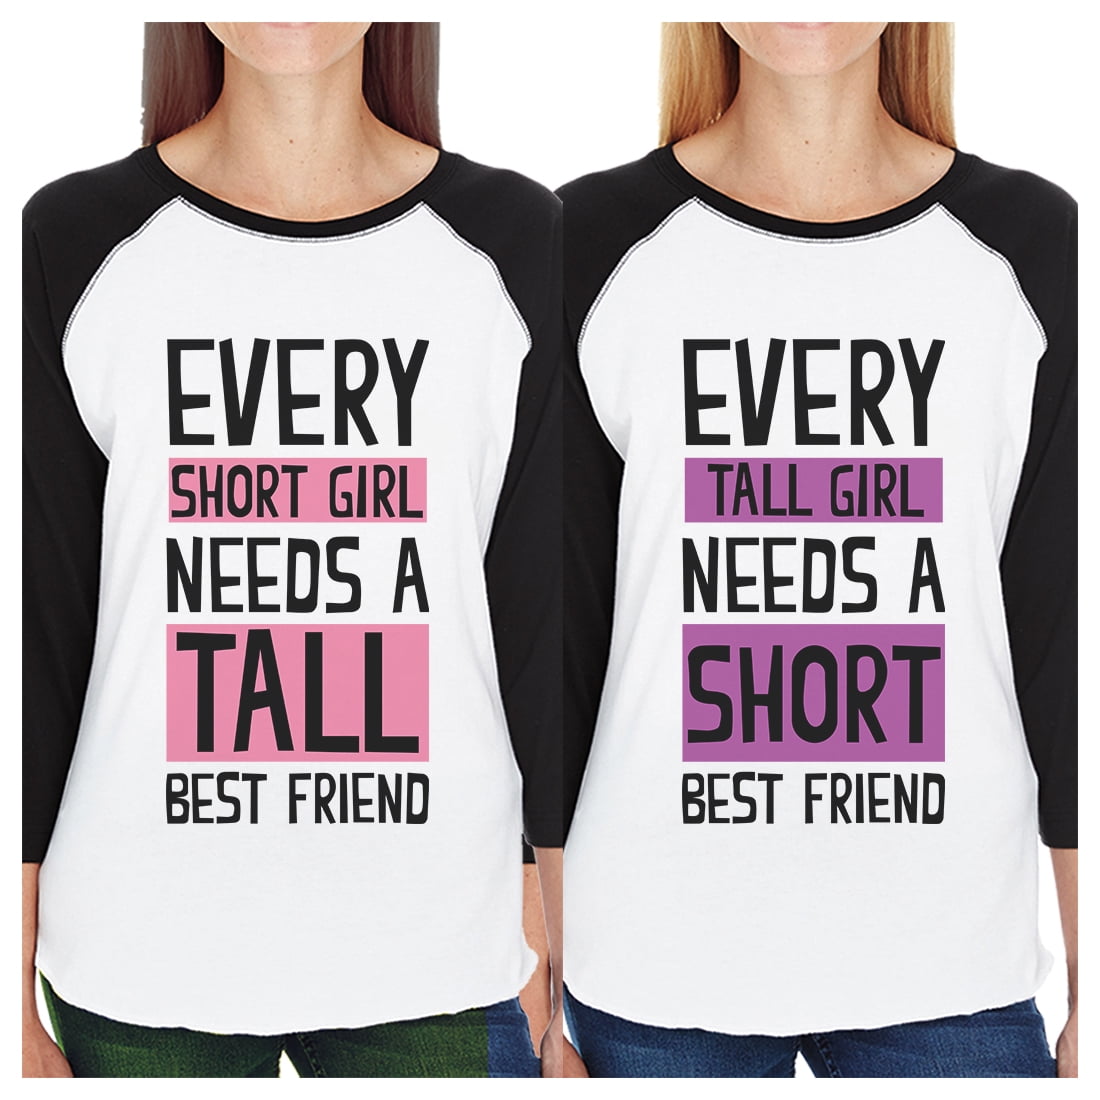 Friend short. Friends best outfits. Best friends ever. Girl Gift for best friend. You know girl перевод